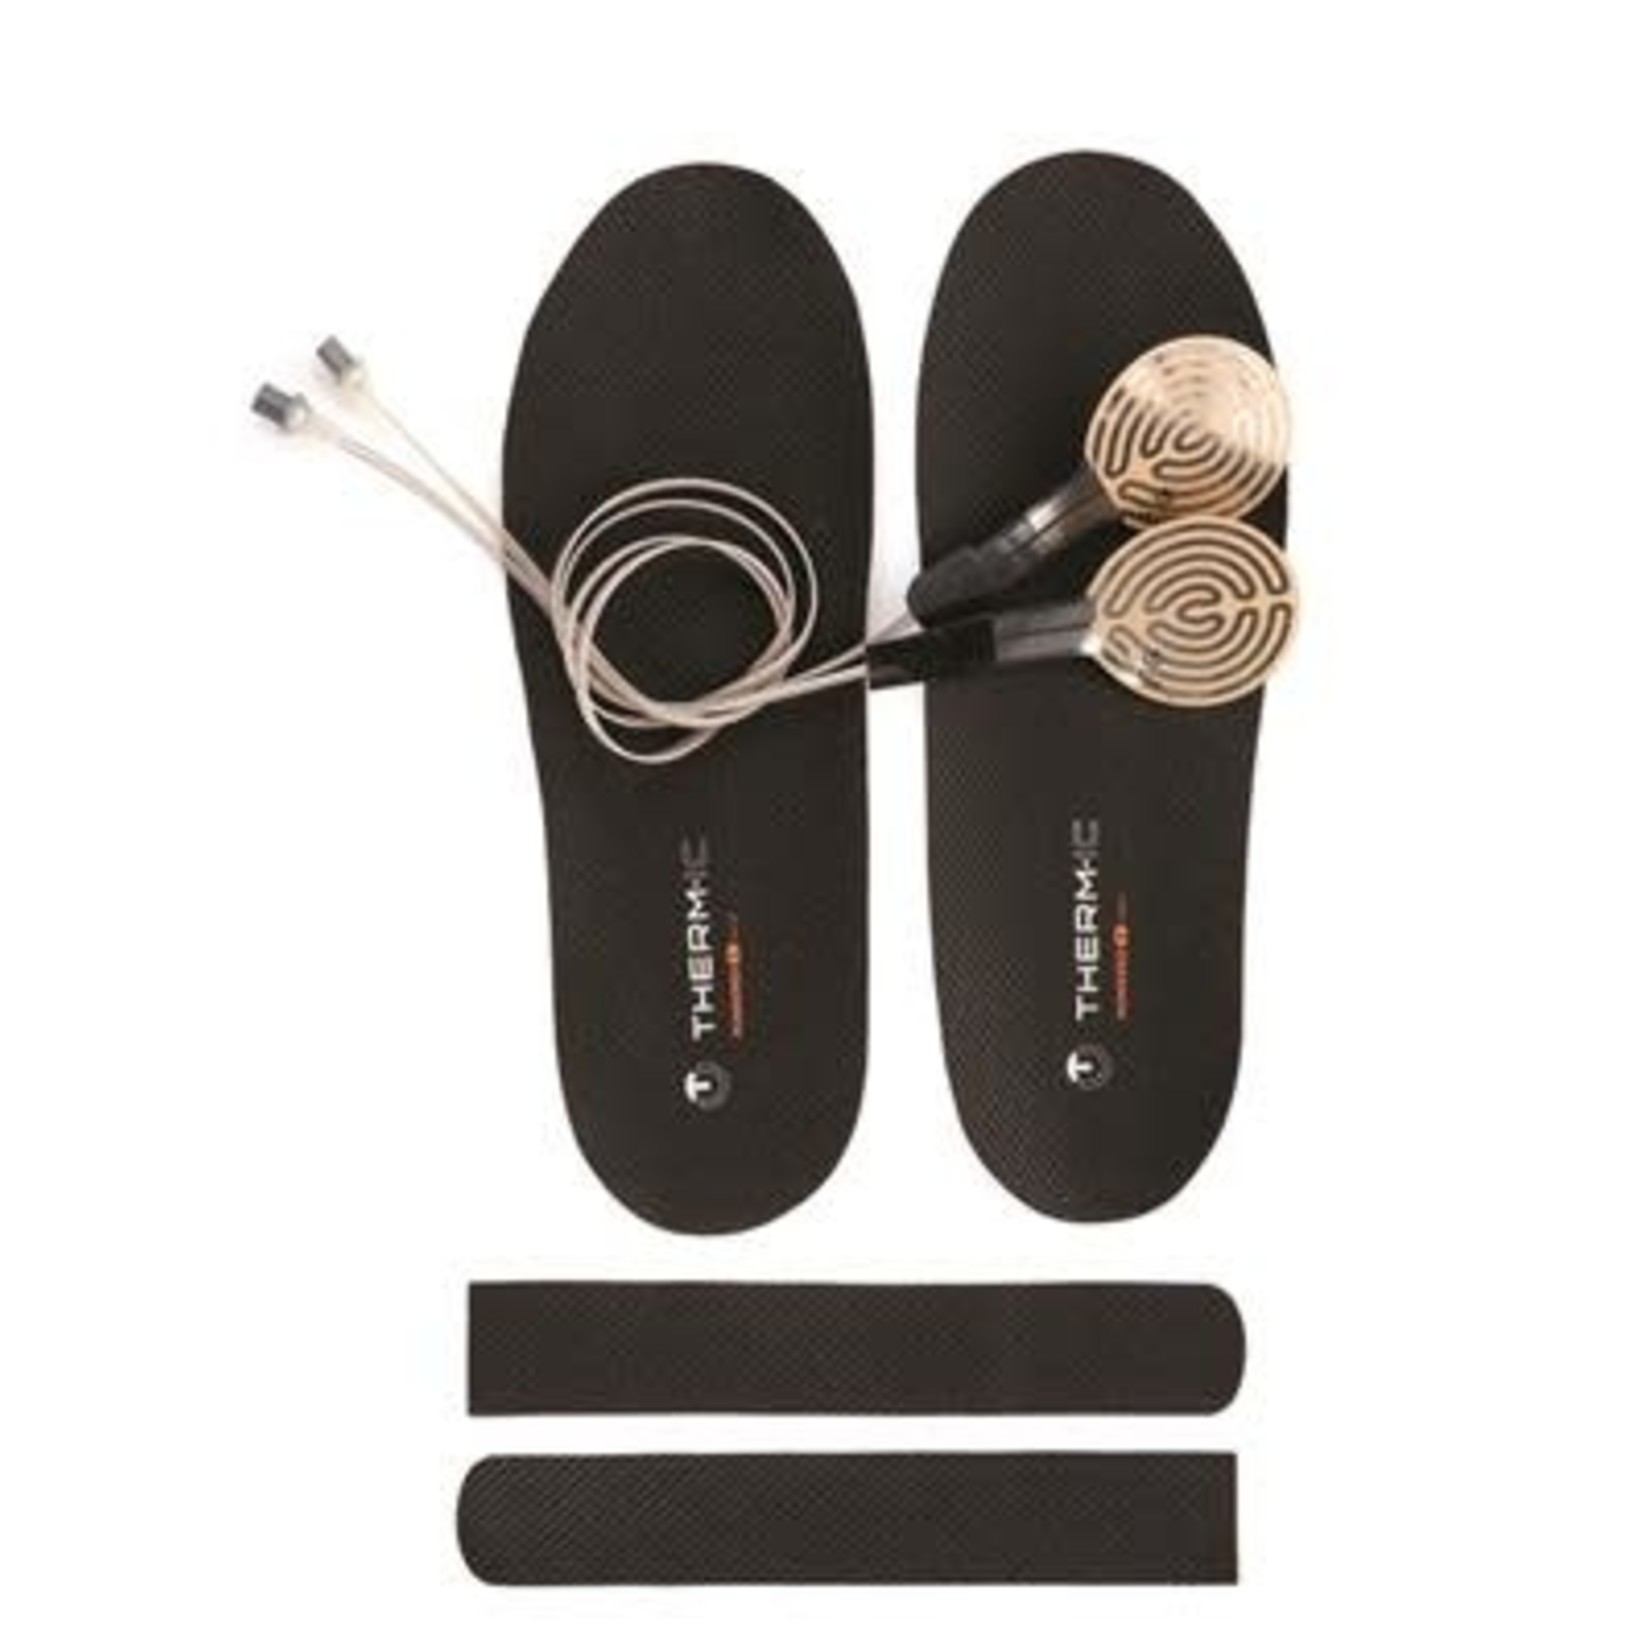 THERMIC HEAT KIT FOR INSOLES